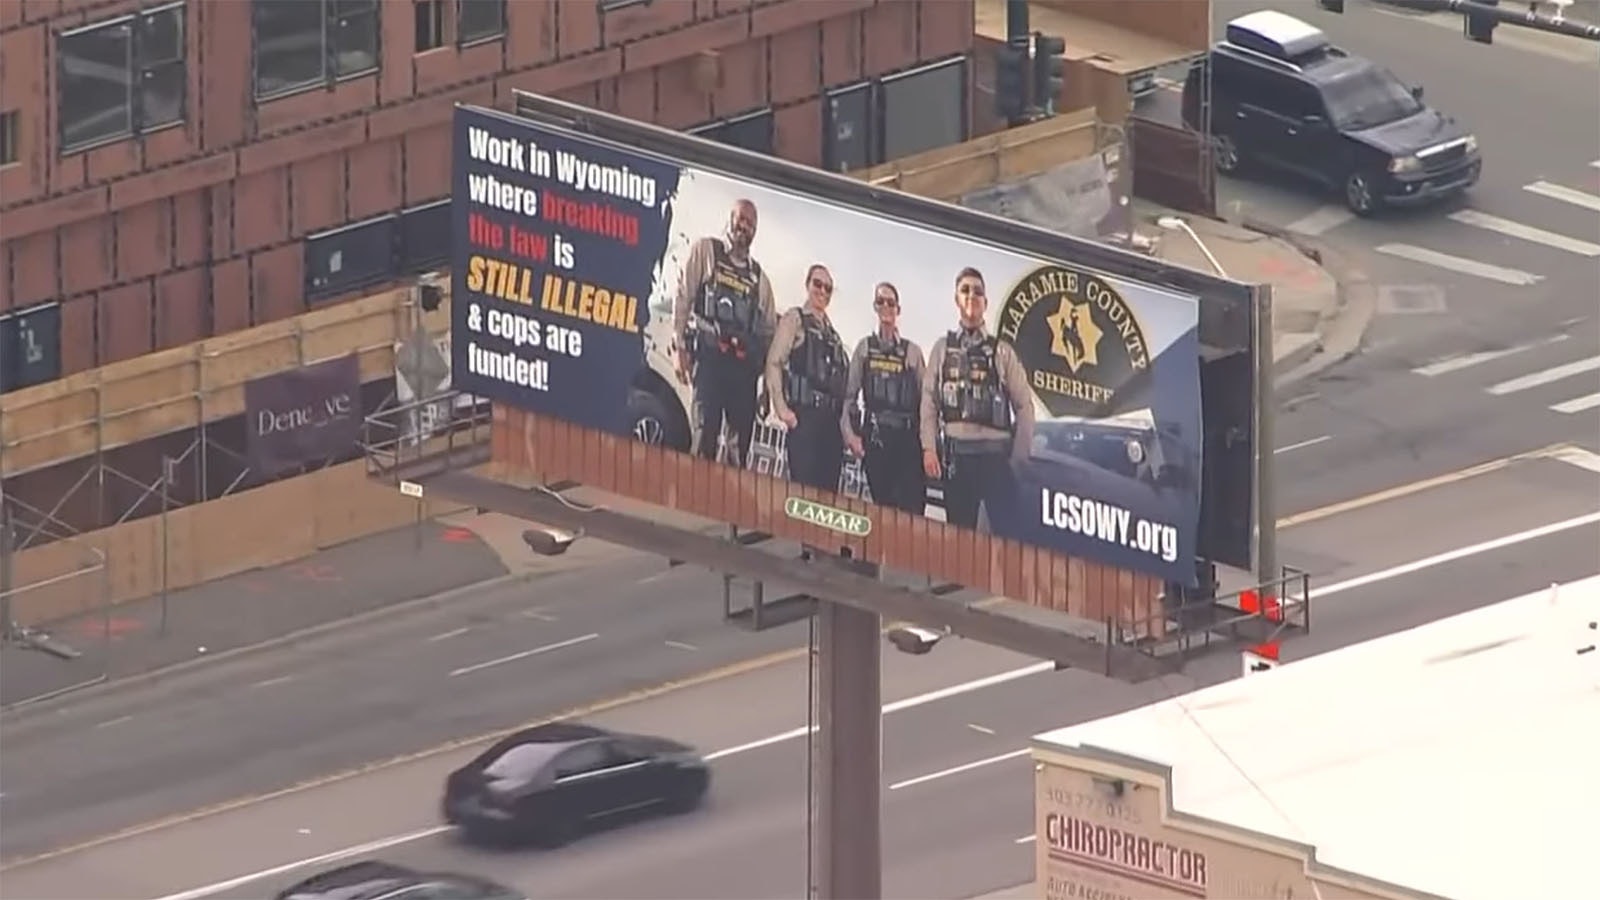 A view of the billboard Laramie County Sheriff's Office bought near downtown Denver.